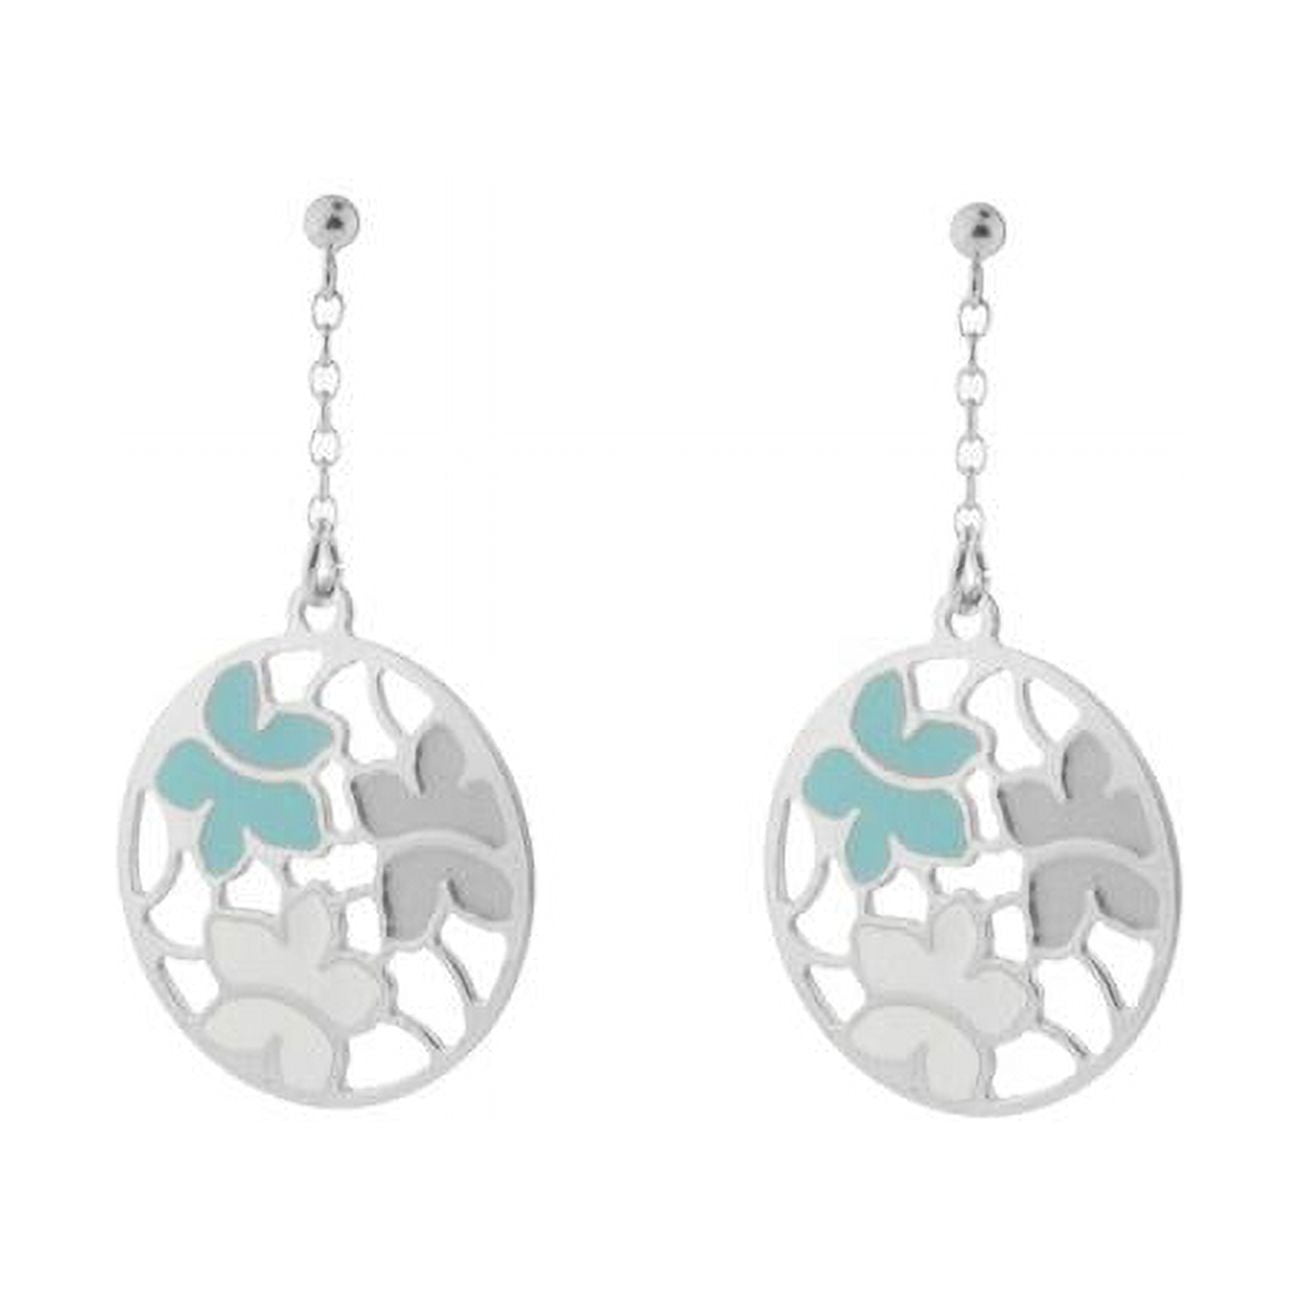 9s107t Etruscan Turquoise & White Flower Earrings In Sterling Silver